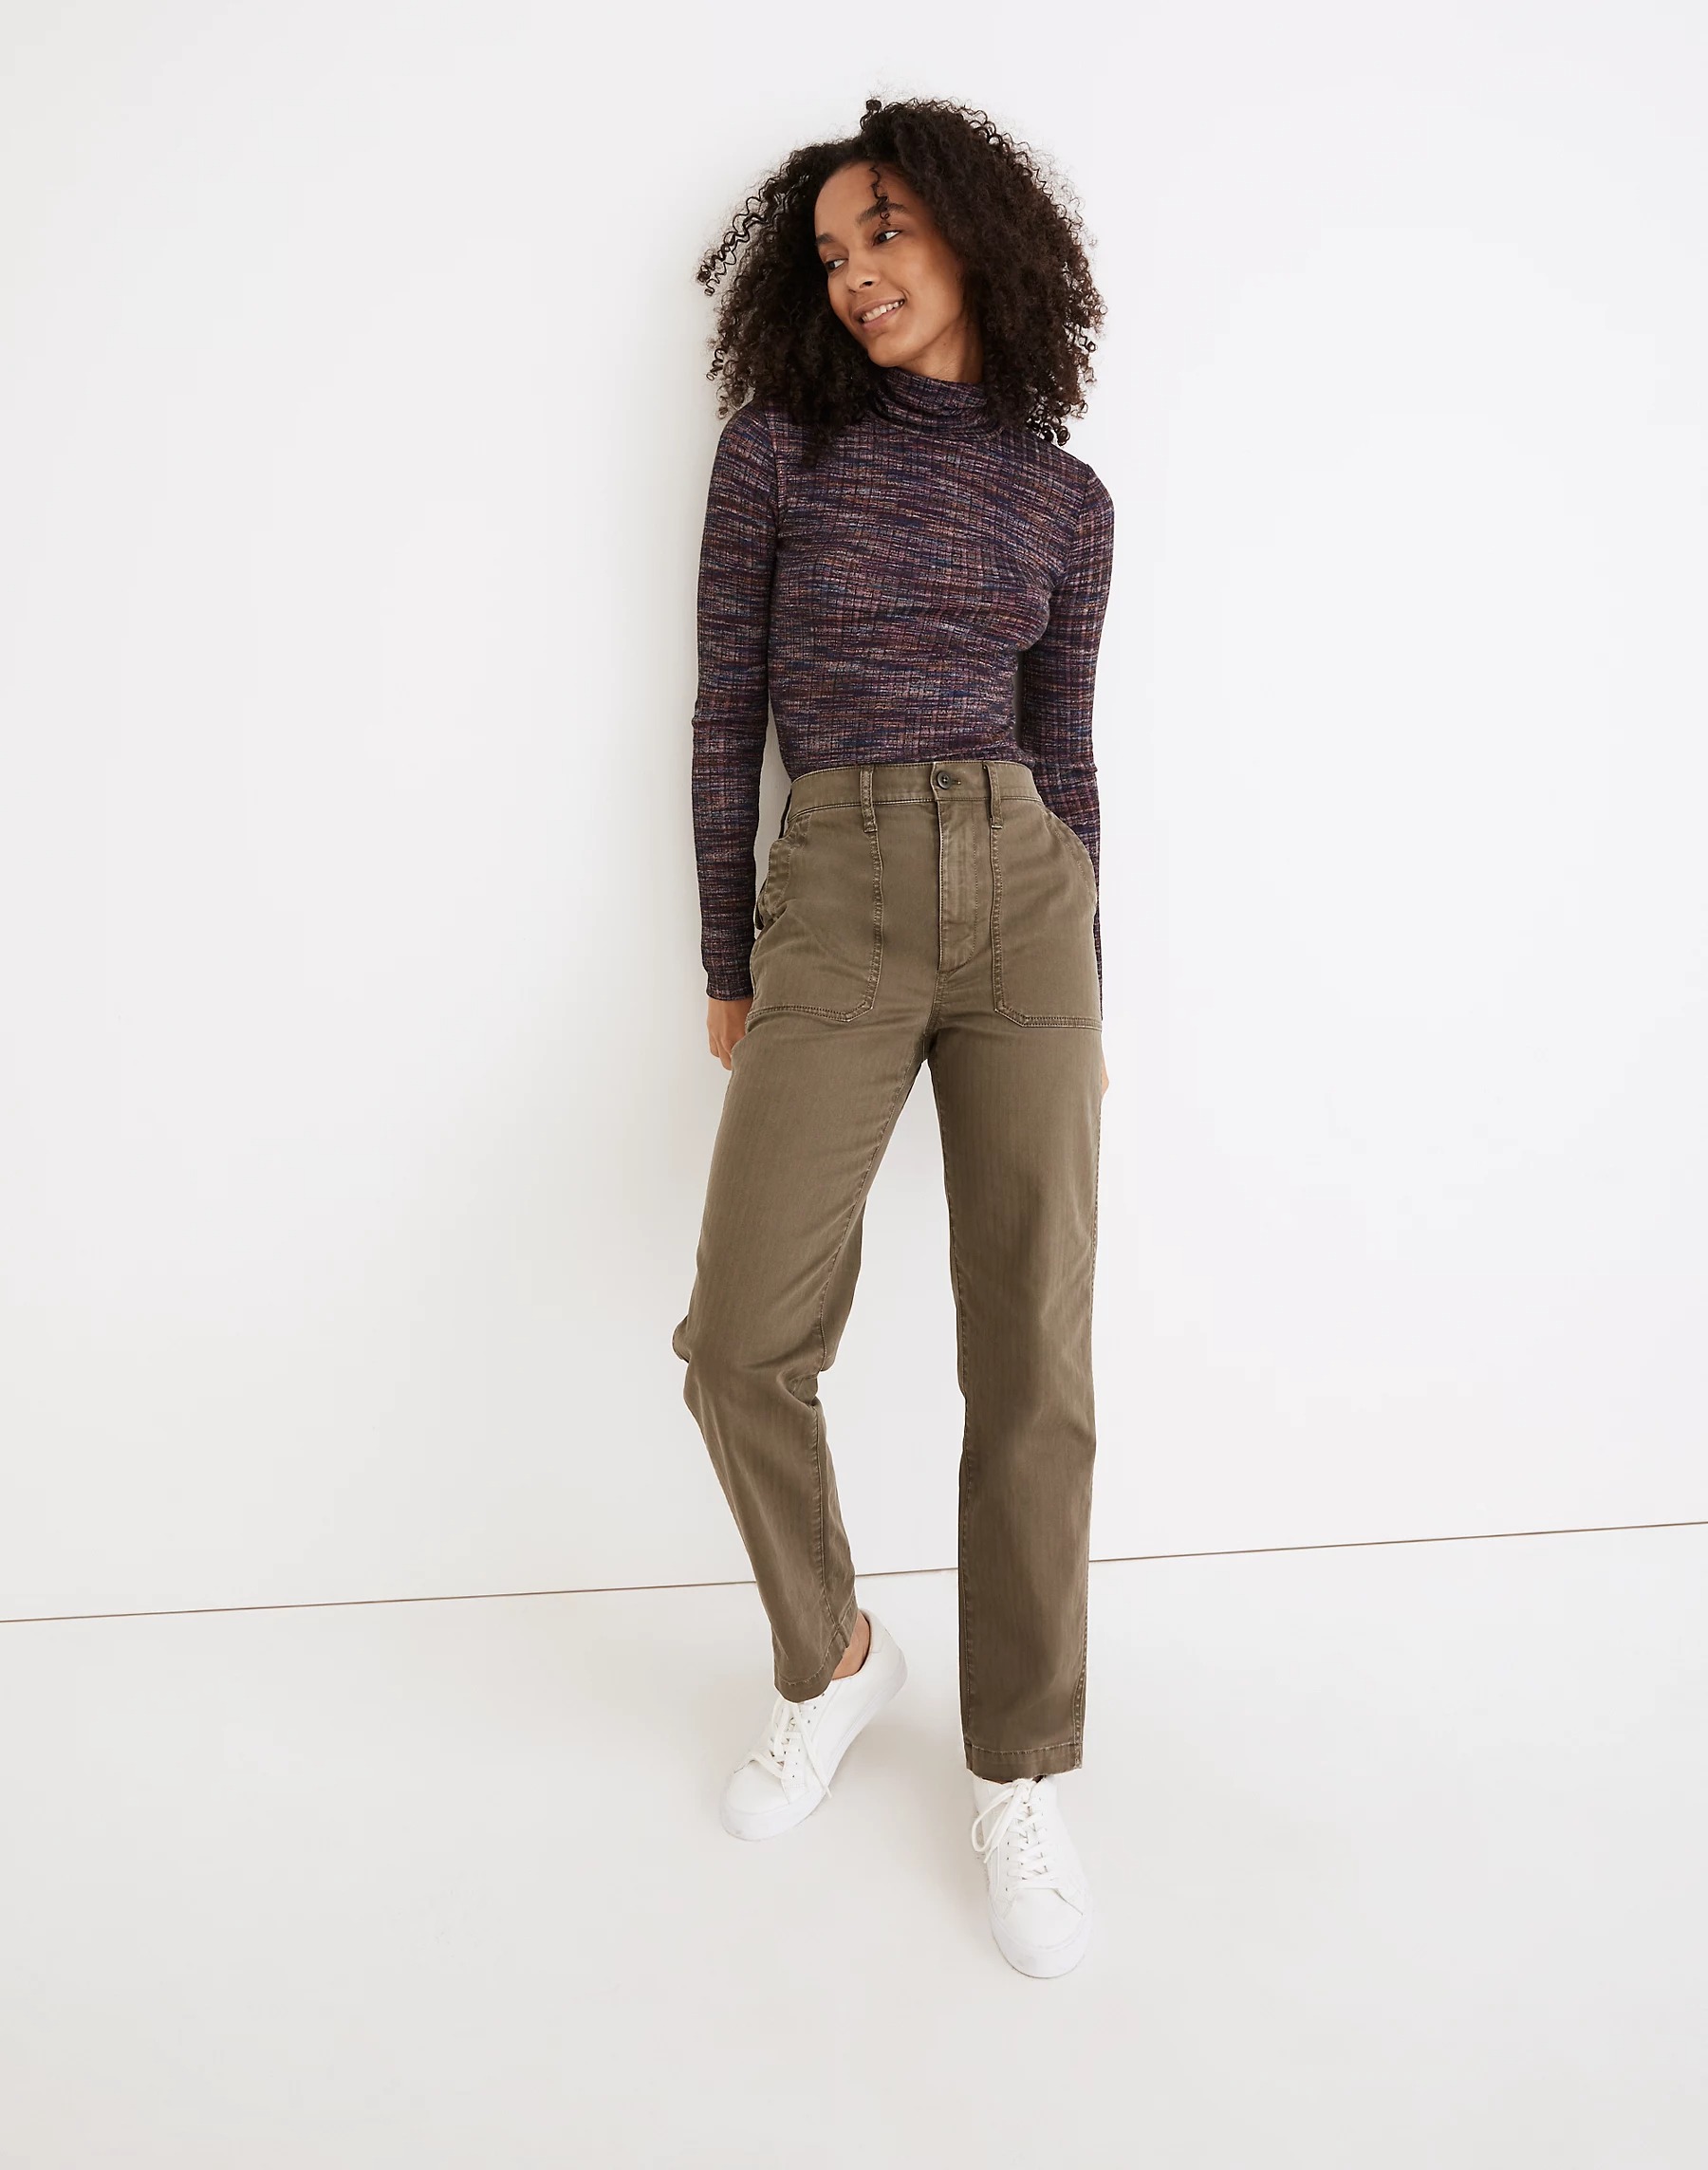 33 Expensive-Looking Basics on Sale at Madewell | Who What Wear